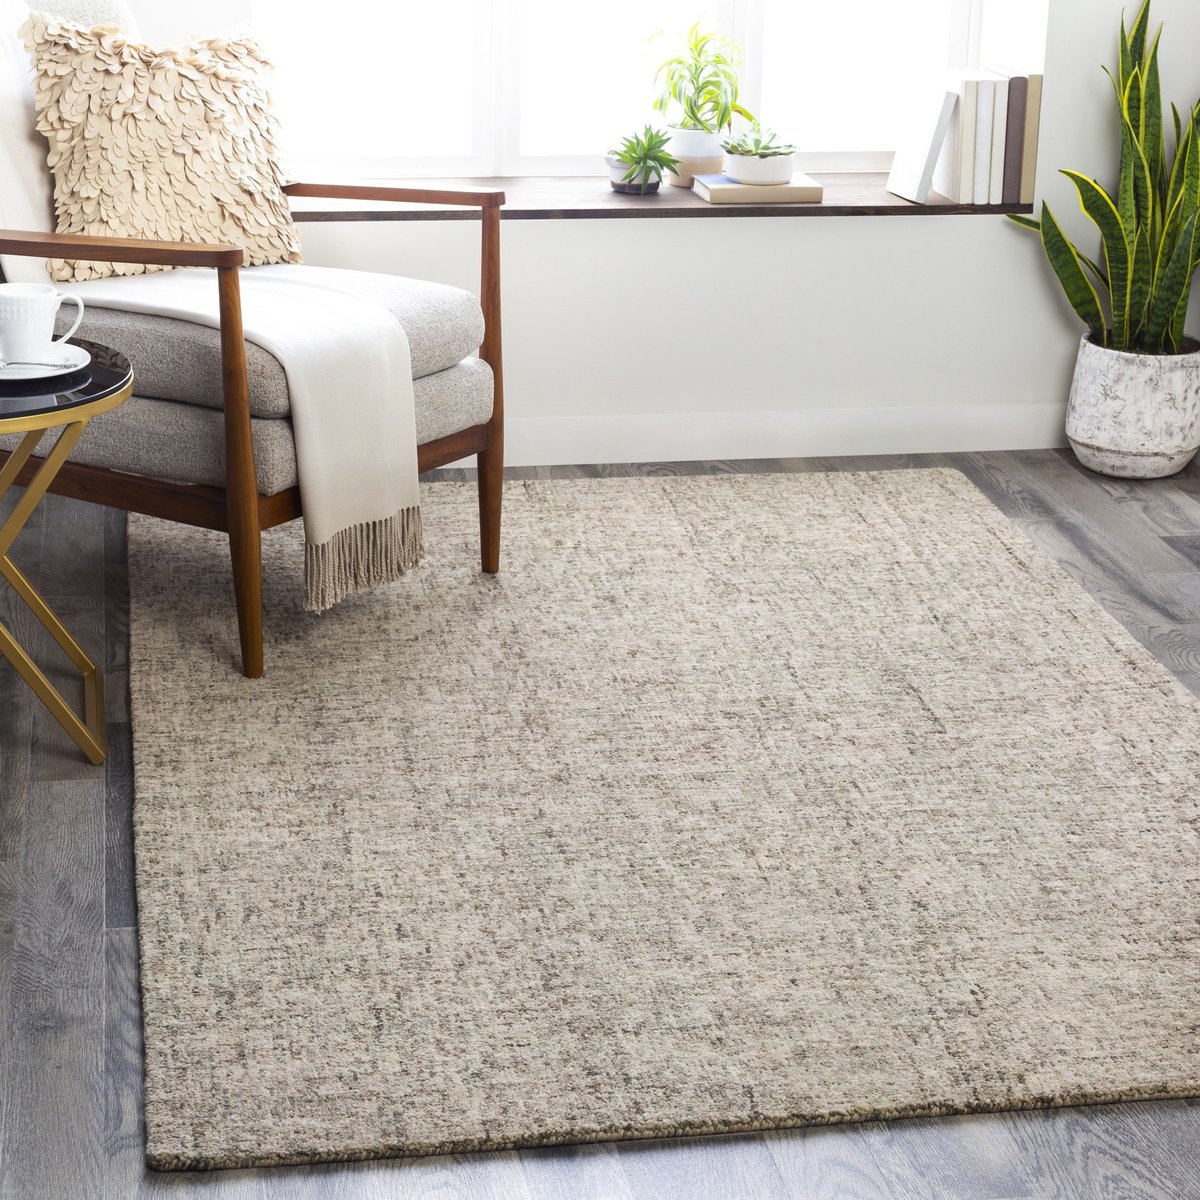 Modern Rug Contemporary carpet Classic Checked Soft Floor Mats Grey Green Rugs 